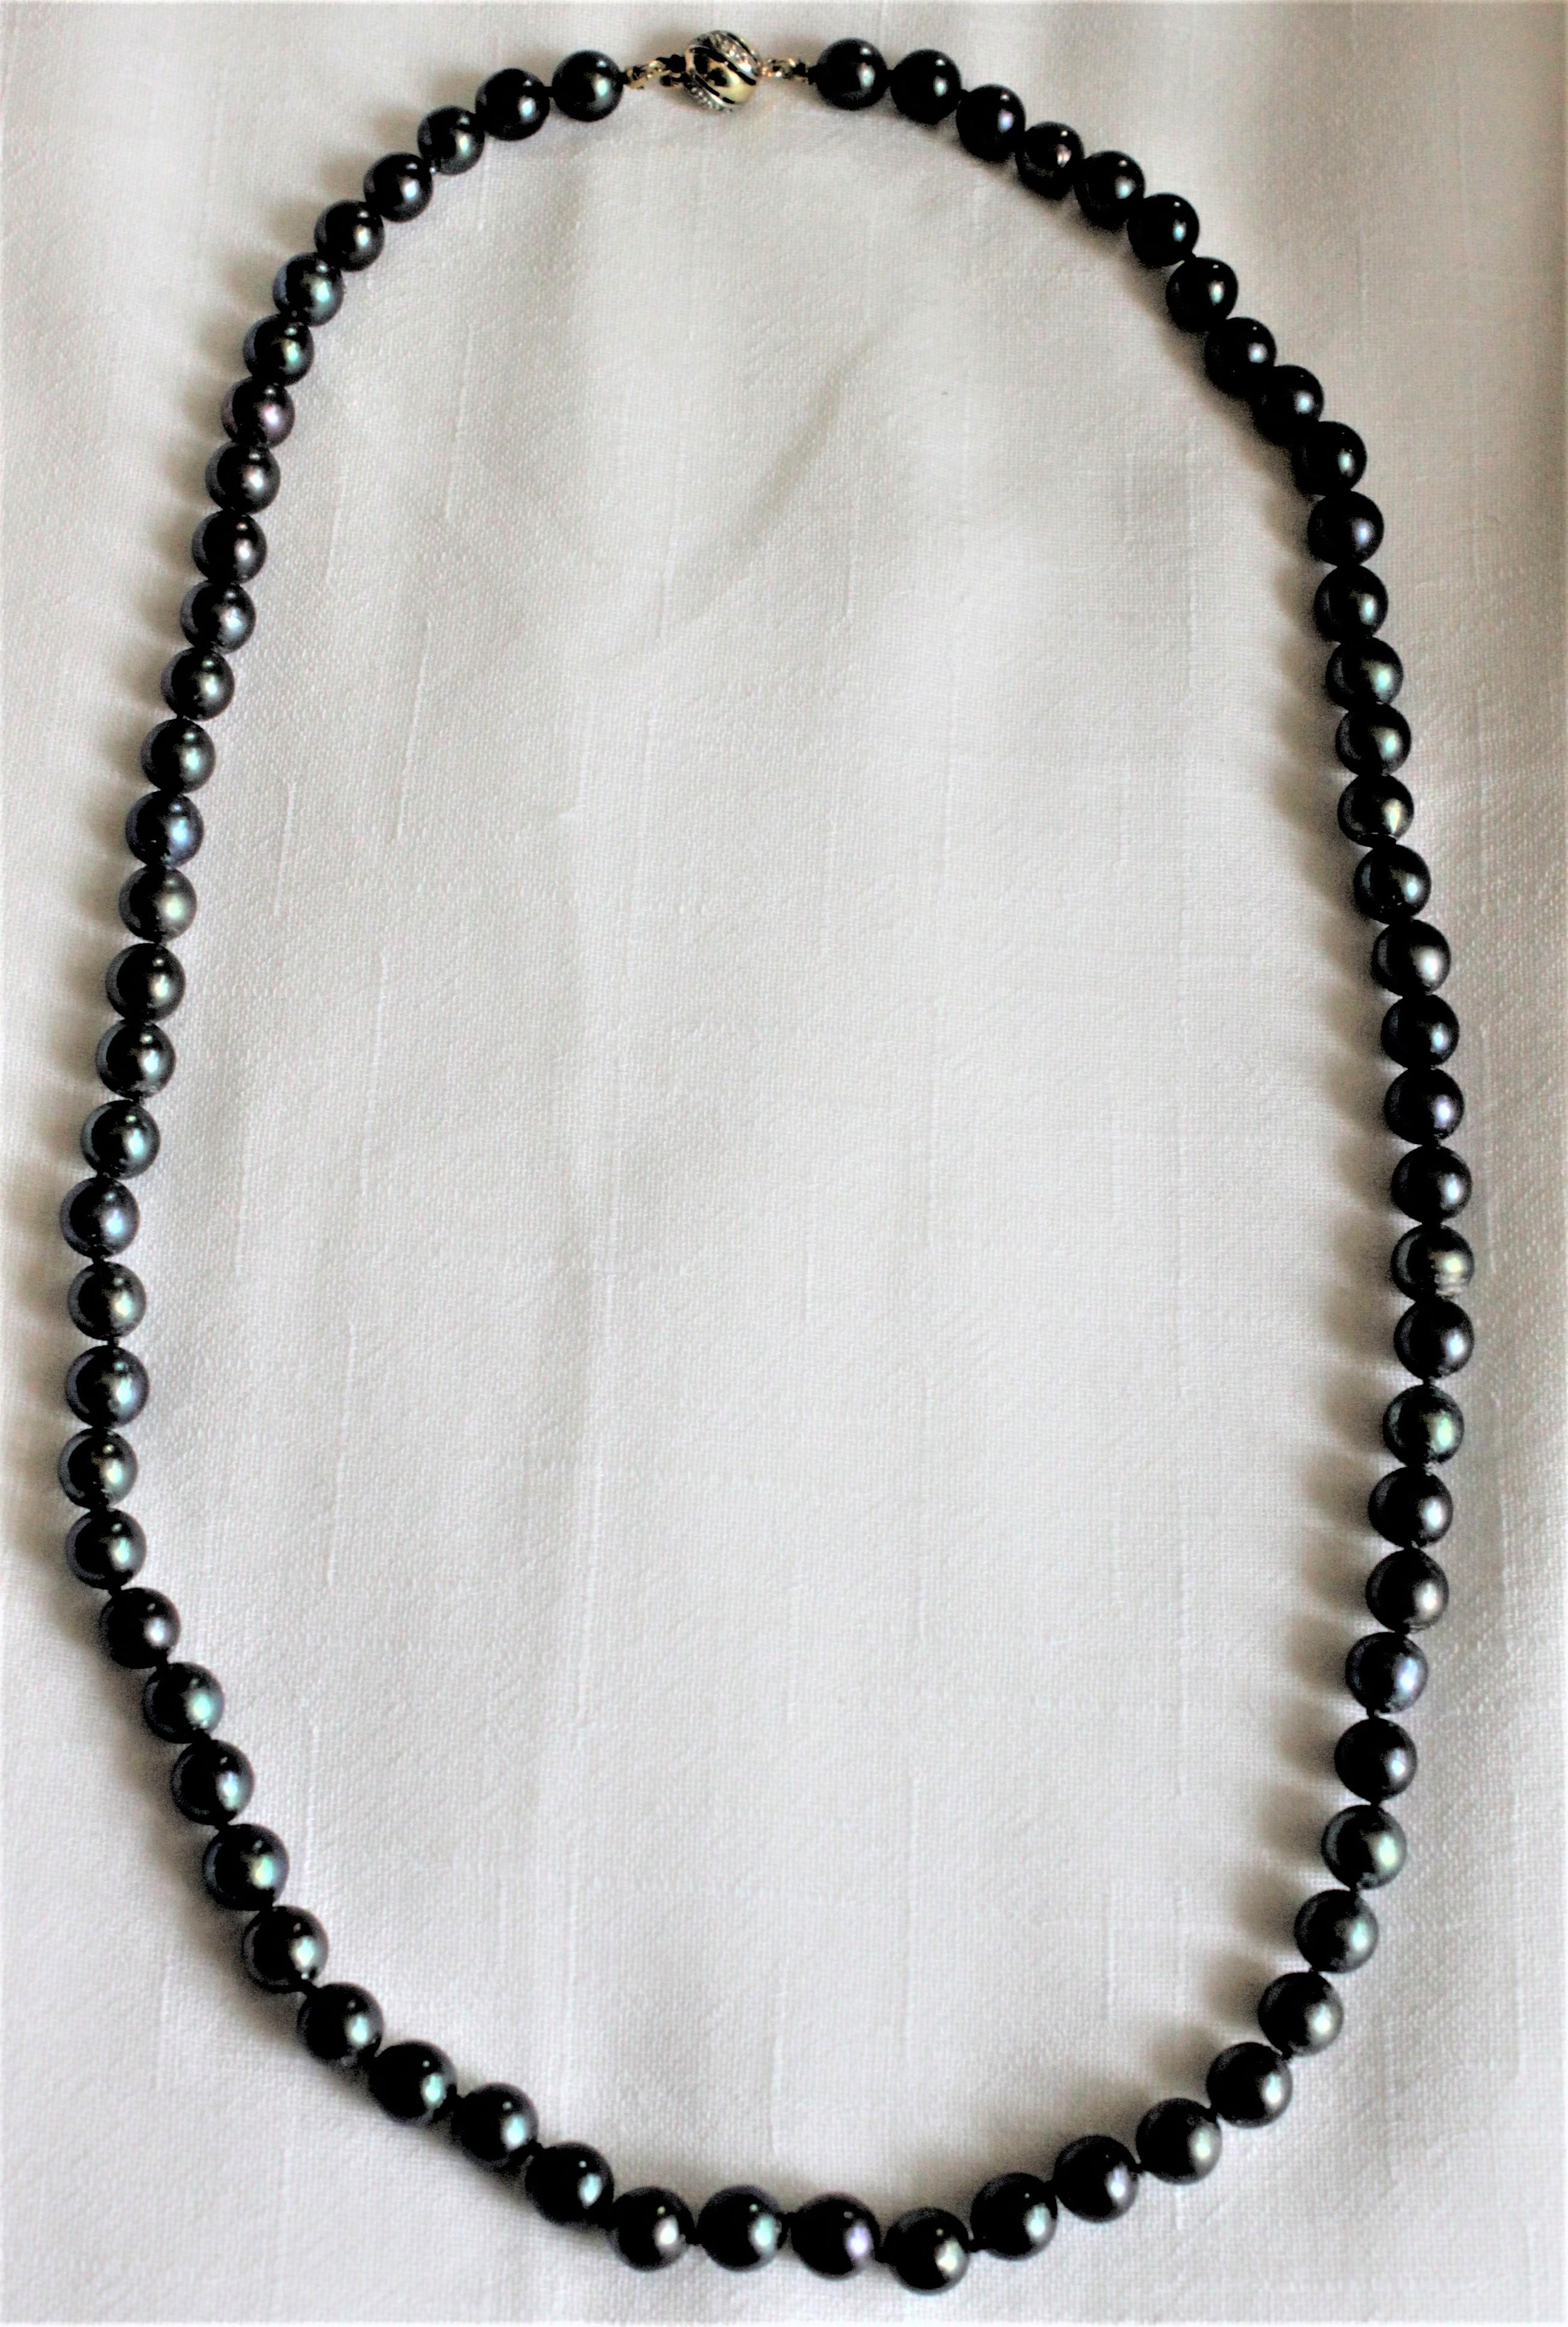 Women's Tahitian Black Pearl Necklace with a 14 Karat Gold Ball Clasp In Good Condition For Sale In Hamilton, Ontario